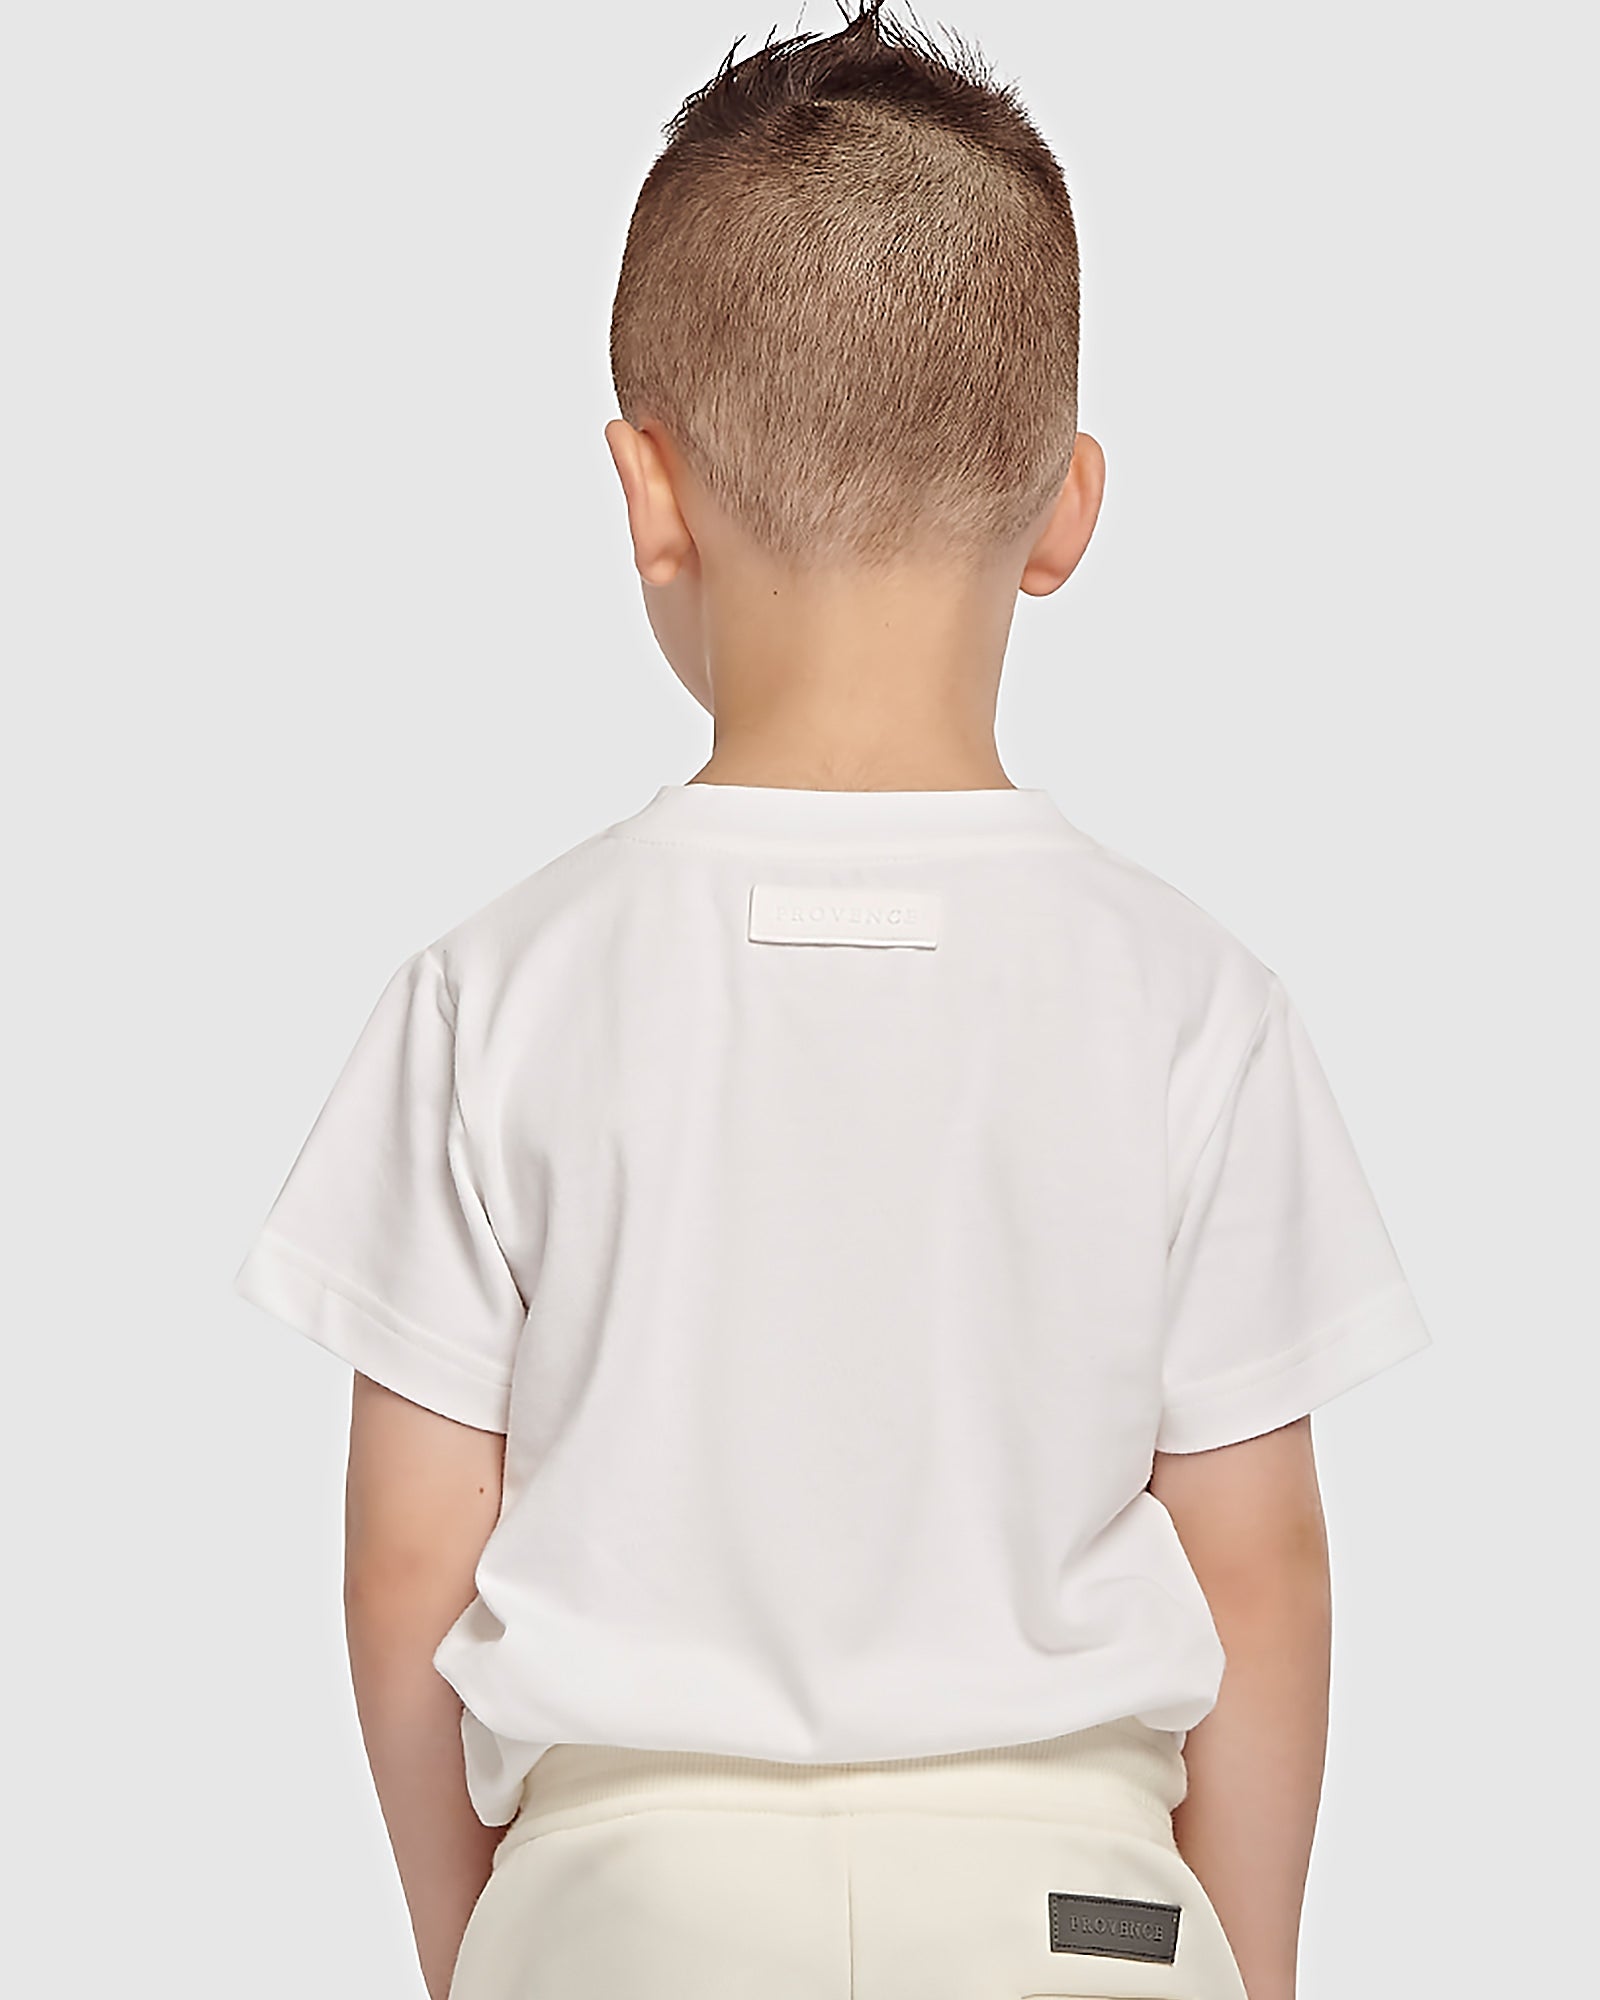 Kids Classic Embroidery T-Shirt